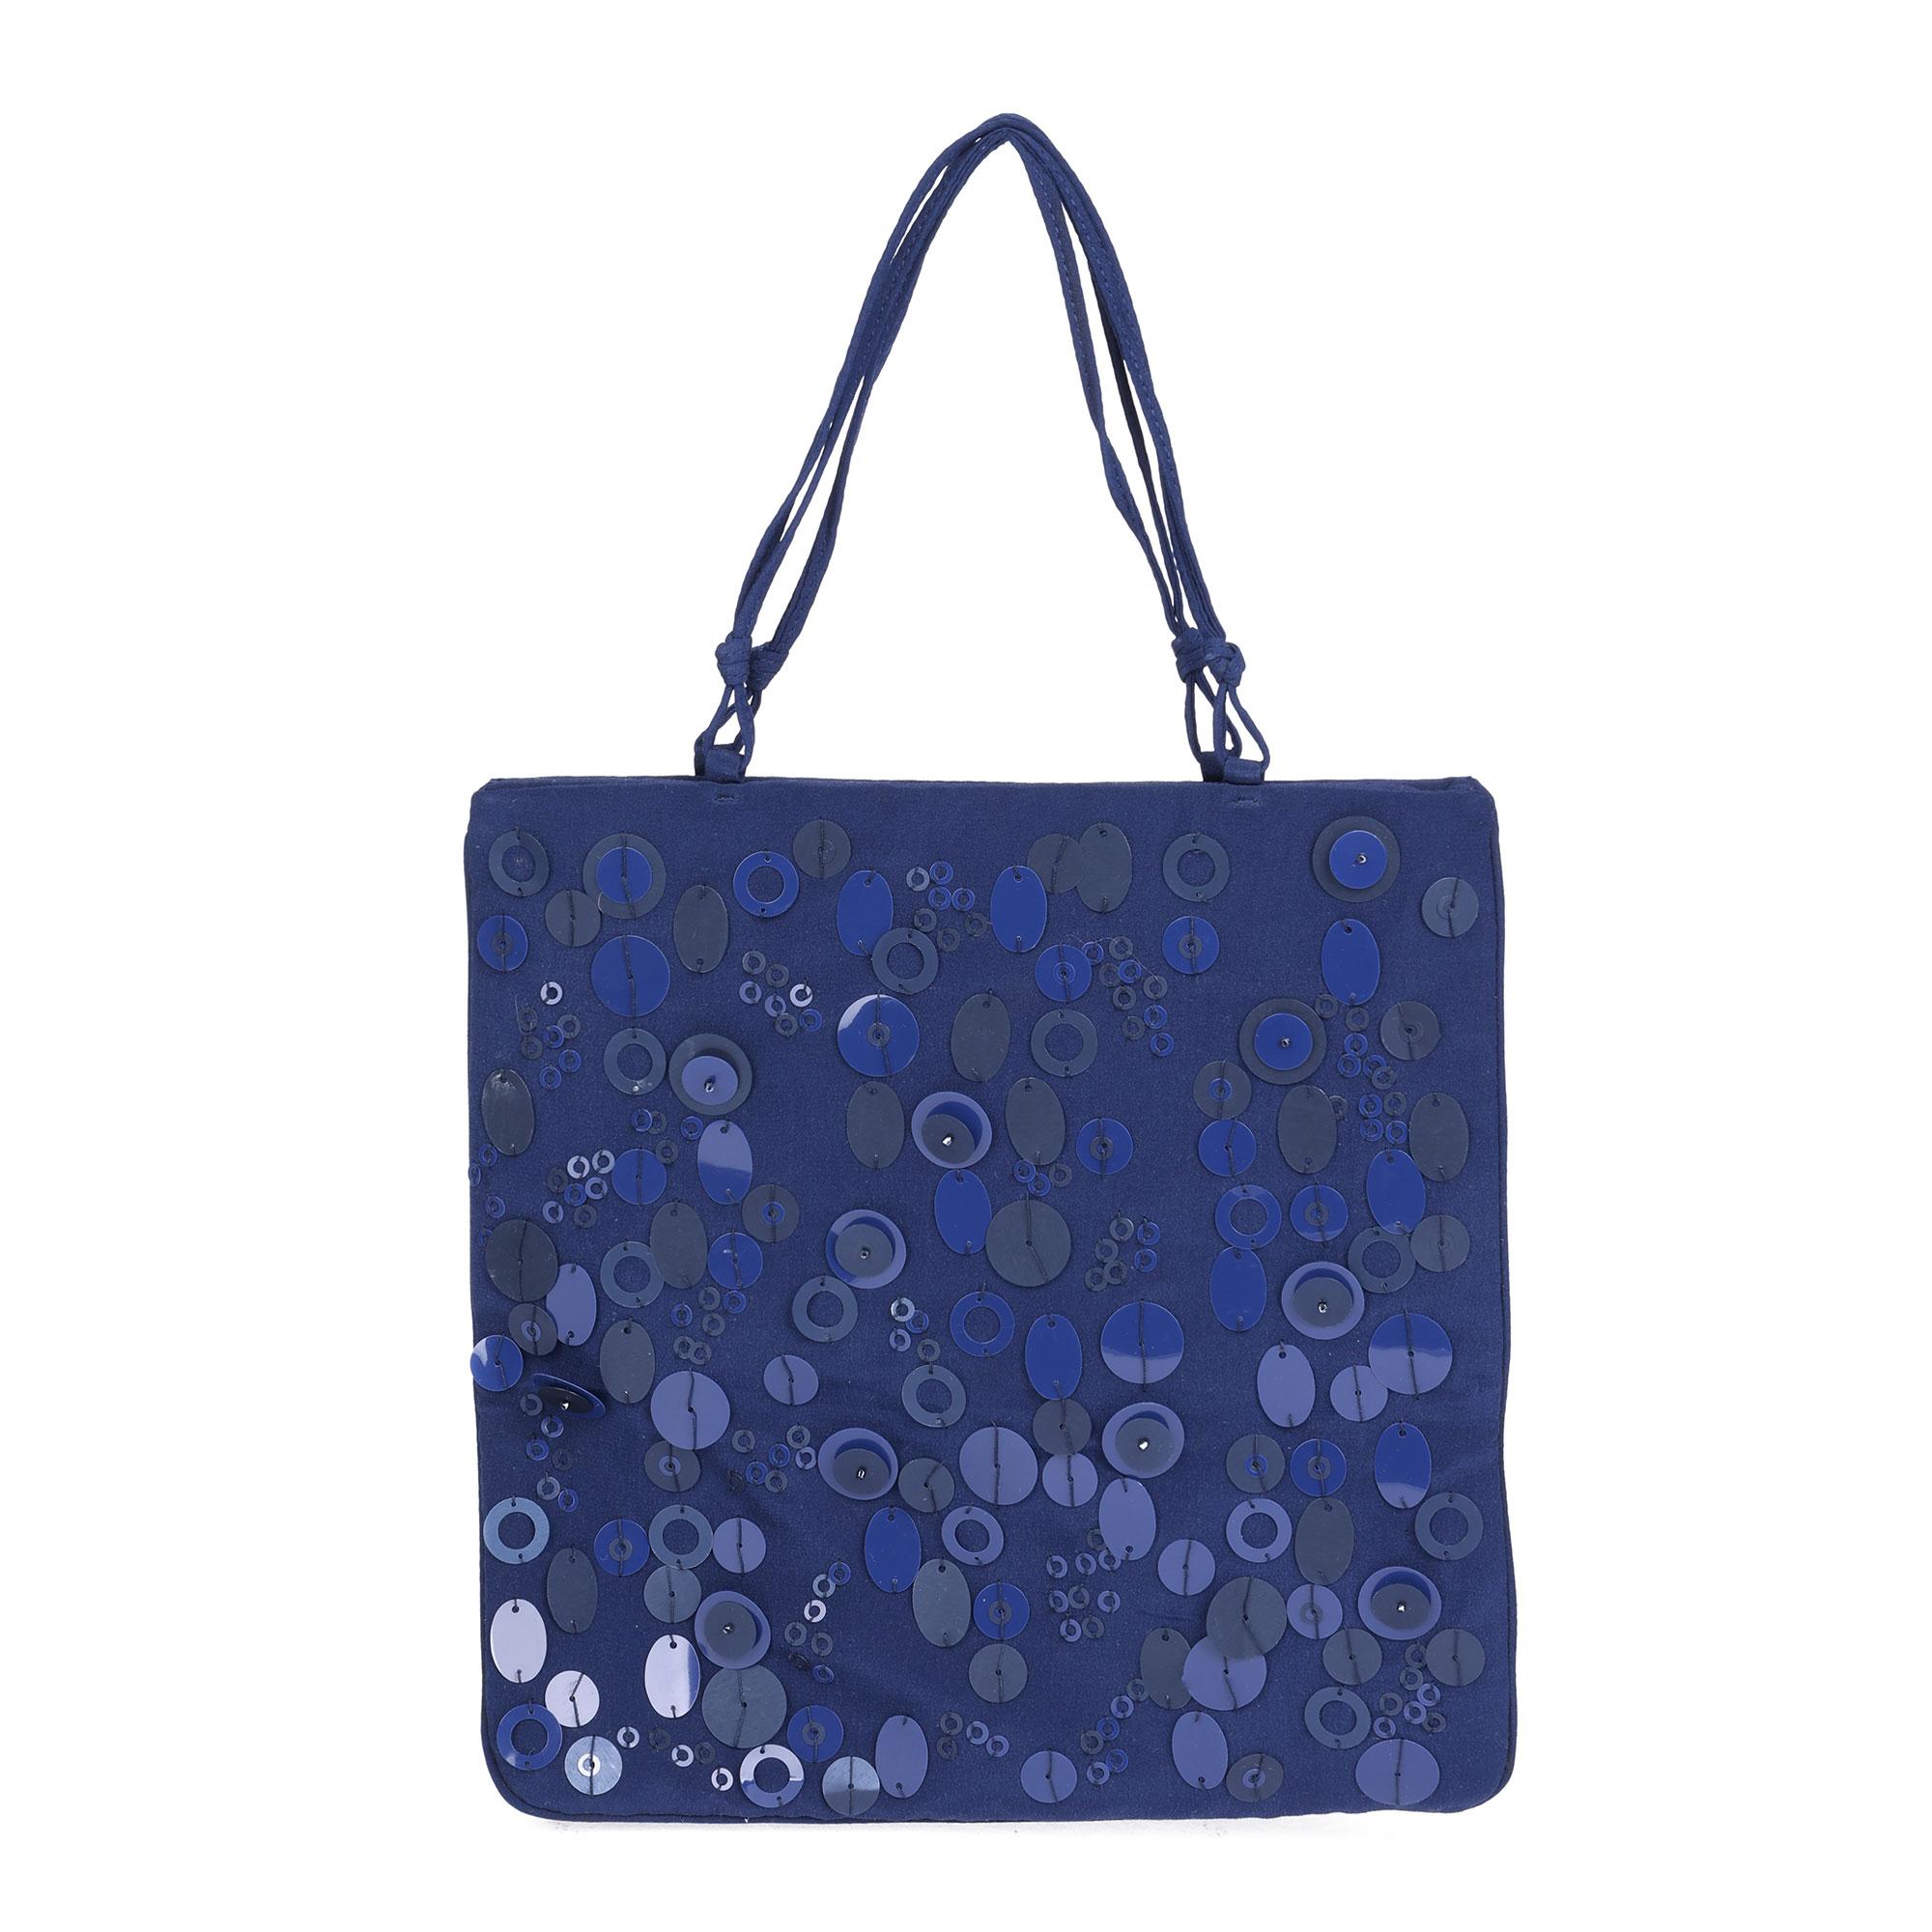 PRADA
Navy Embellished Fabric Vintage Evening Tote

Xupes Reference: CWAHF-HB015
Serial Number: 80
Age (Circa): 2000
Authenticity Details: Date Stamp (Made in Italy)
Gender: Ladies
Type: Tote

Colour: Navy
Hardware: Silver
Material(s): Fabric,